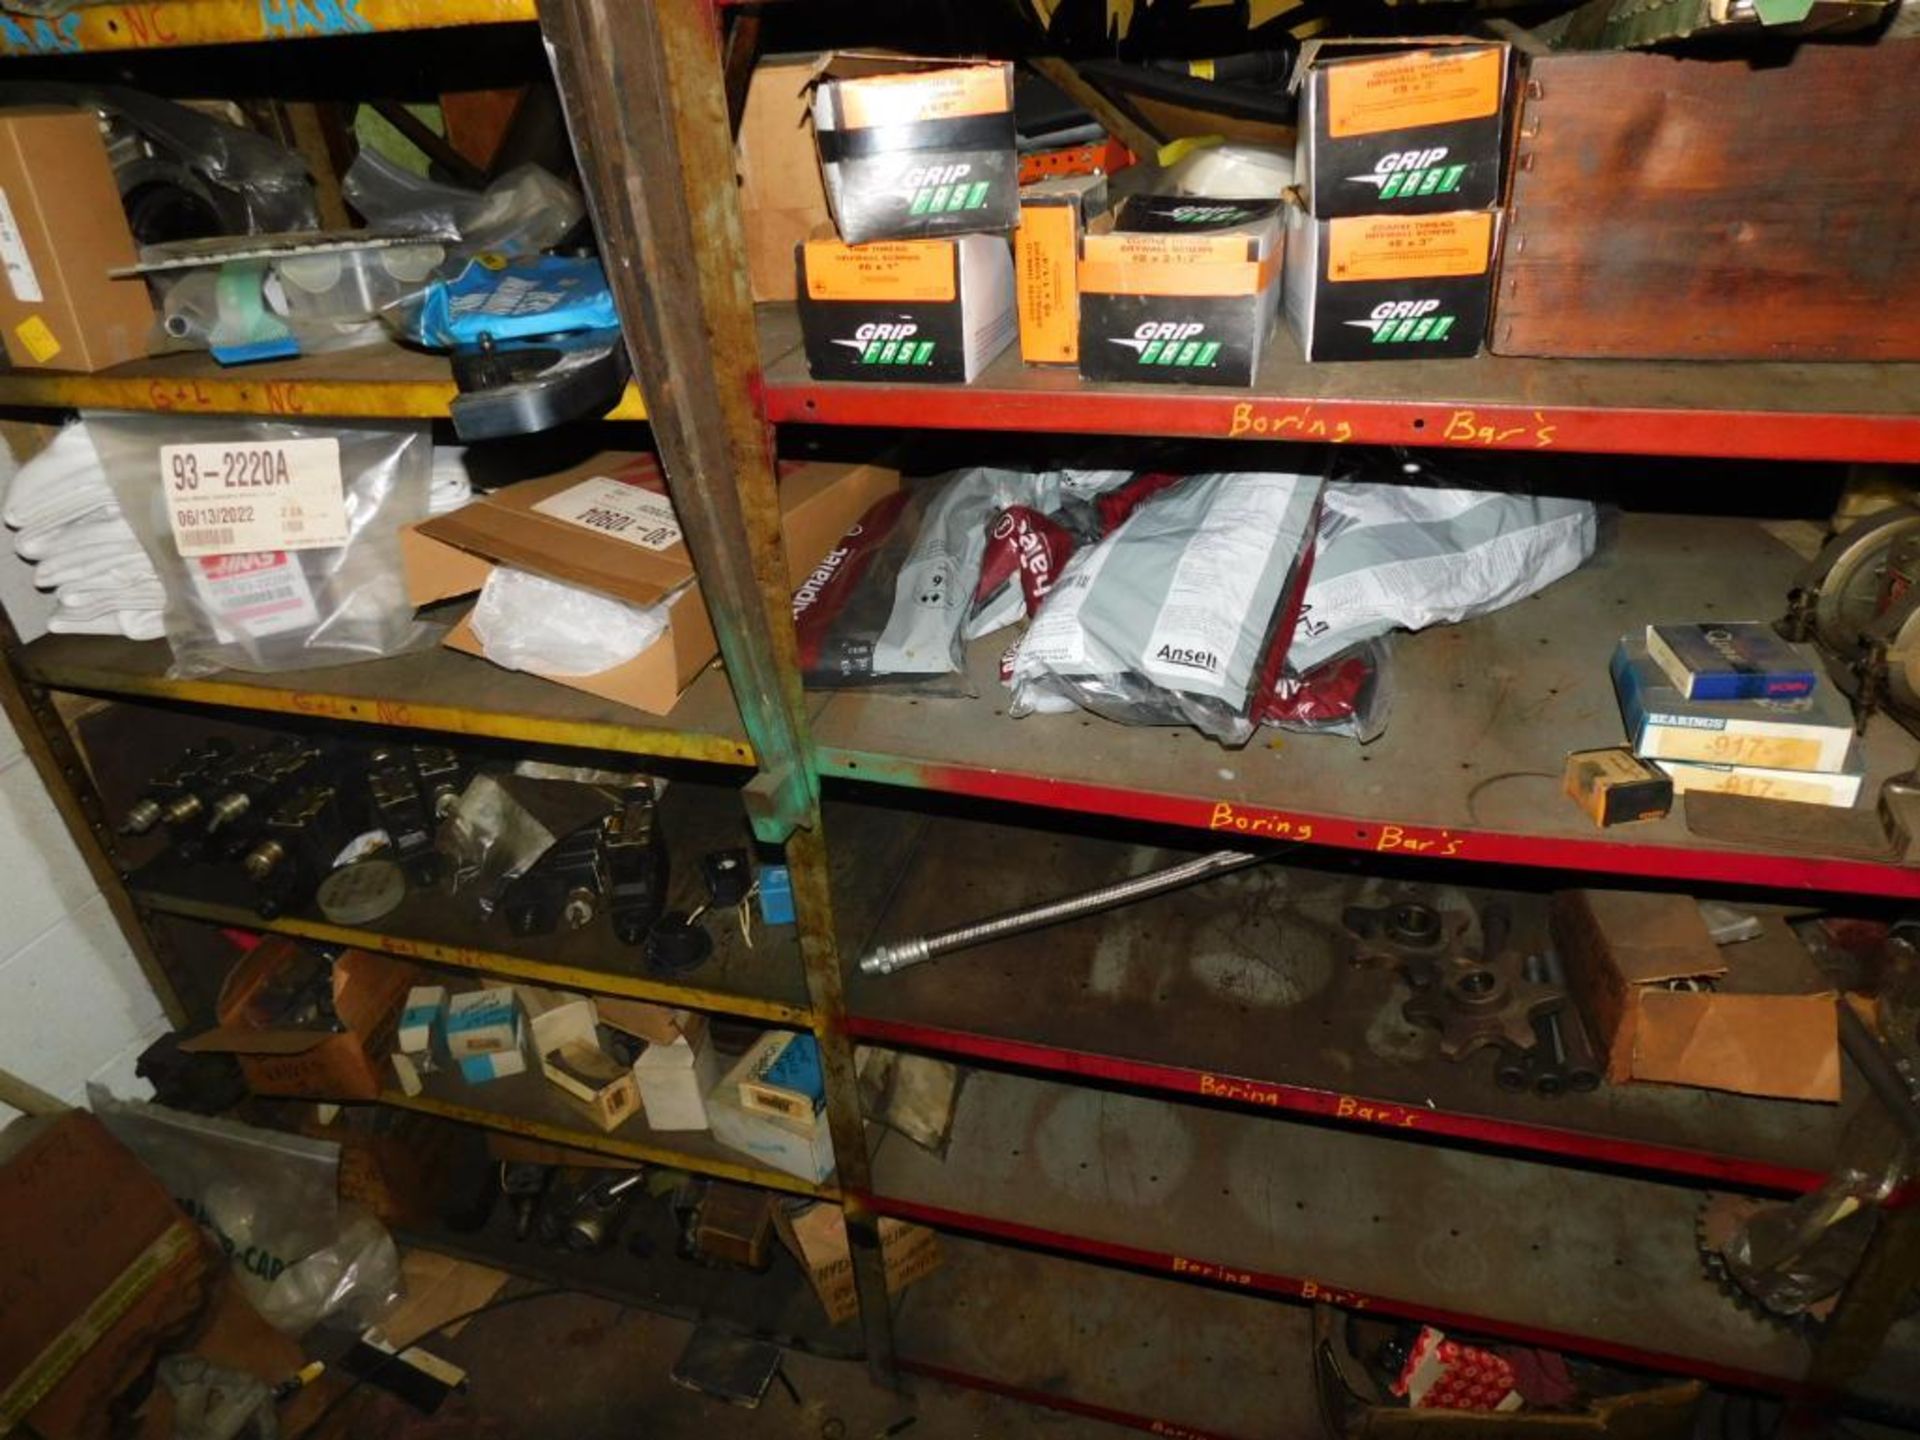 LOT: Contents of Back Maintenance Room: (2) Racks of Contents, Machine Parts, Hosing, Wire, Parts Wa - Image 6 of 16